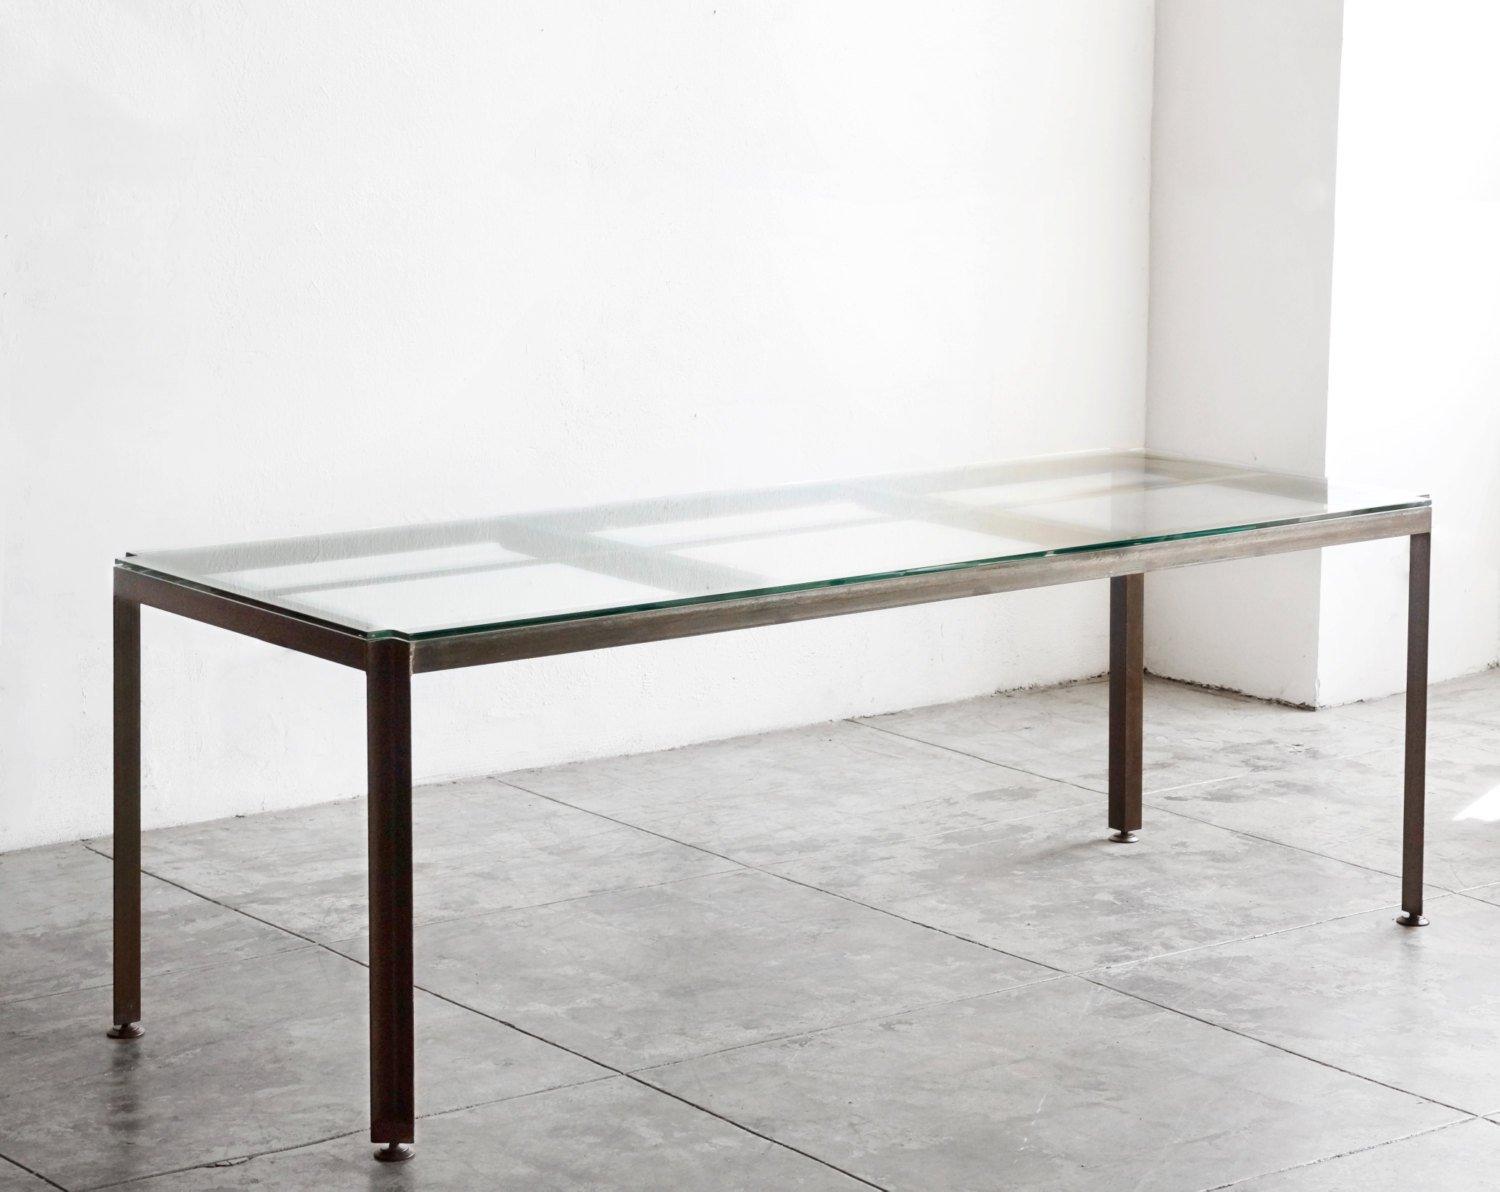 Outstanding Industrial-style table made exclusively by Rehab vintage Los Angeles. Composed of heavy duty angle iron treated with a patina finish. Half-inch tempered glass top with unique angled corners reveals the frame's elegant spine. Ideal for